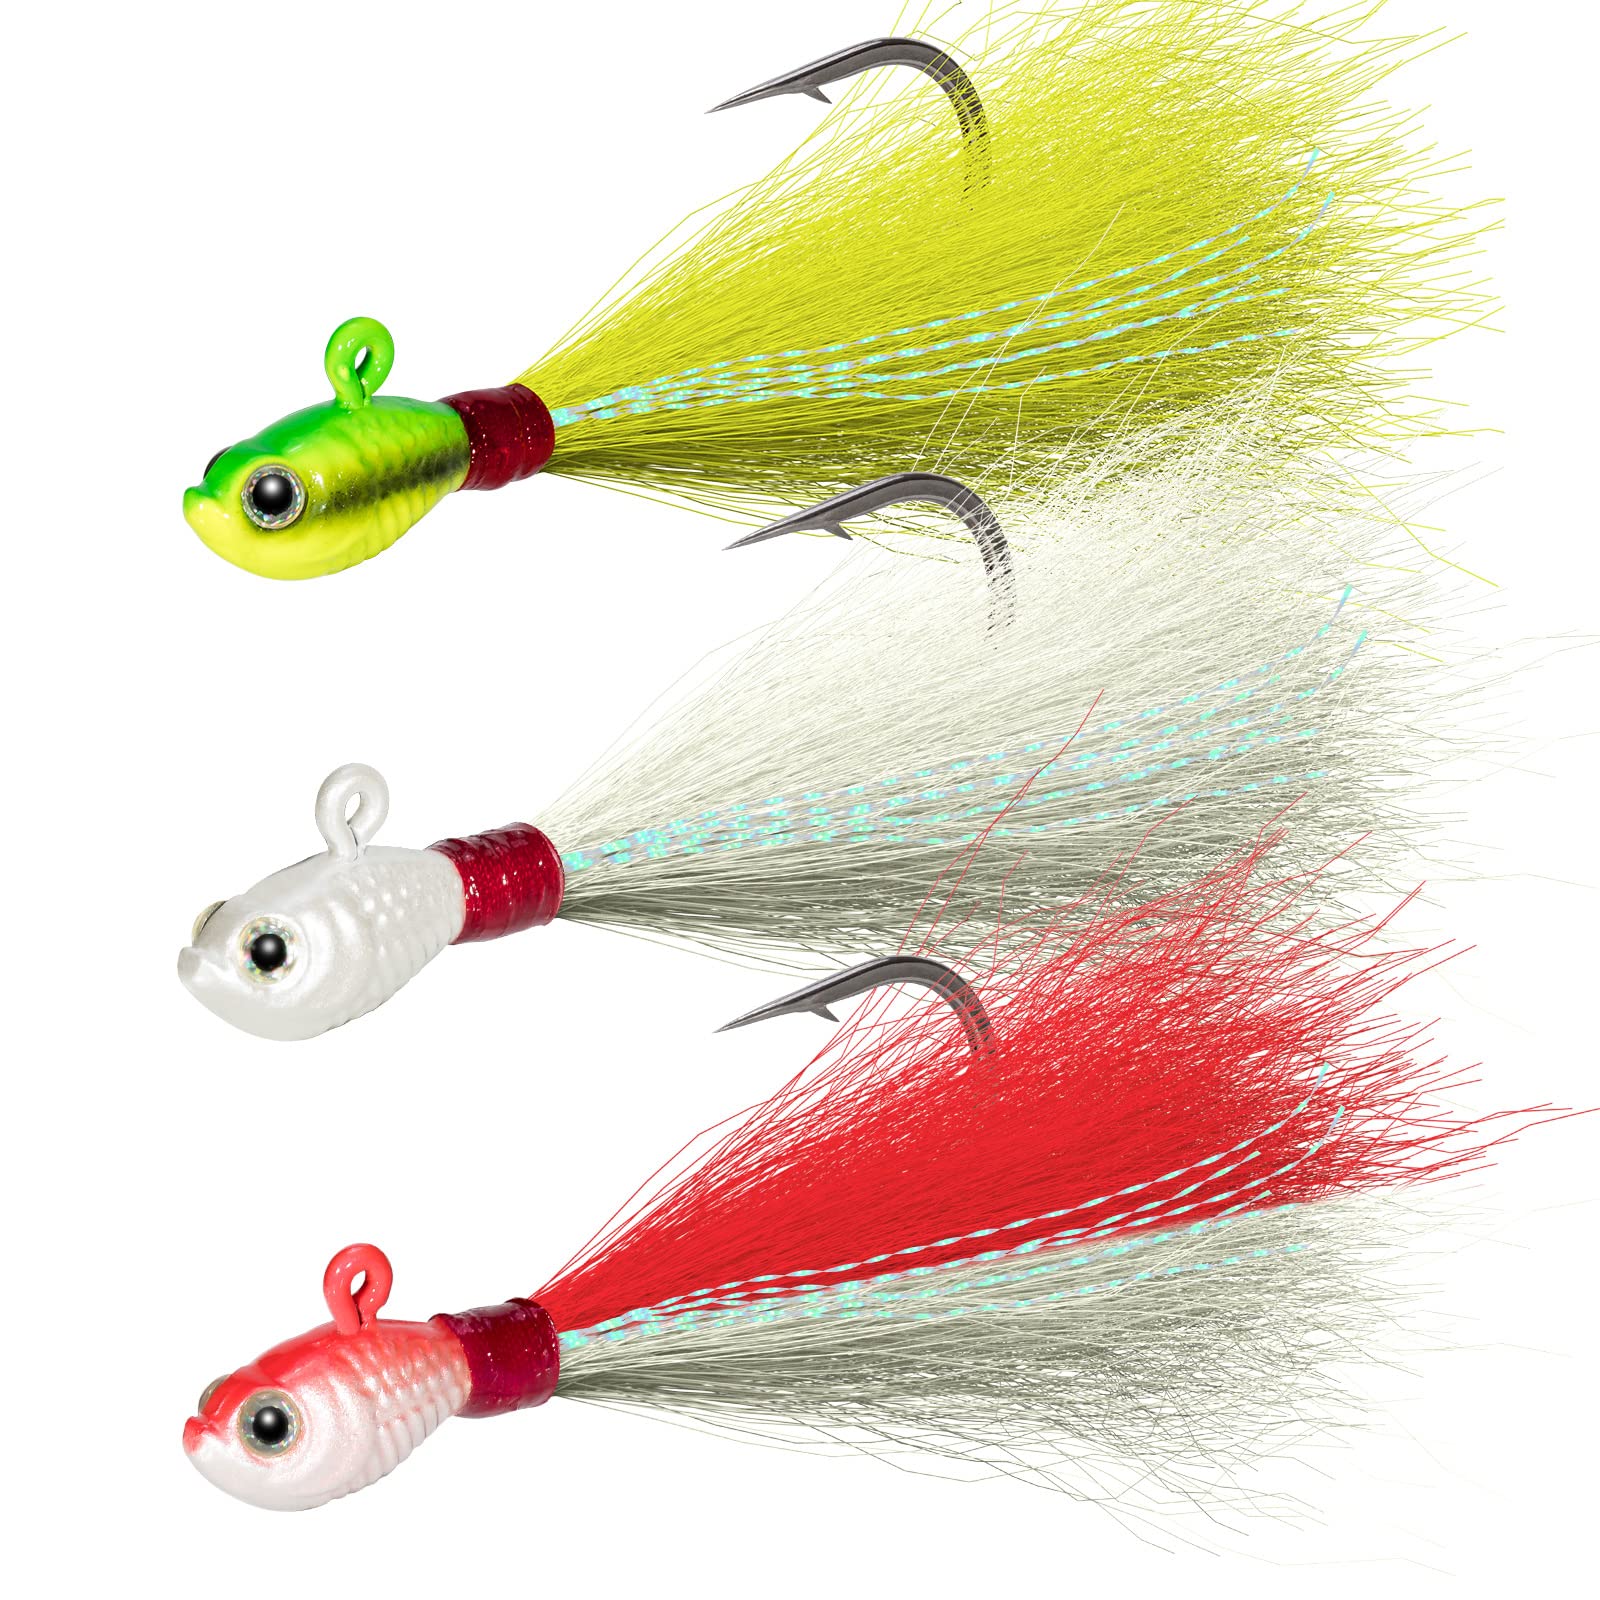 UV Glowing Strong Hook Bucktail Jigs Saltwater Hair Jigs-Head Fishing Lures  Assorted Kit for Striped Bass Walleye Snook Rockfish Redfish 1/4oz 1/2 oz